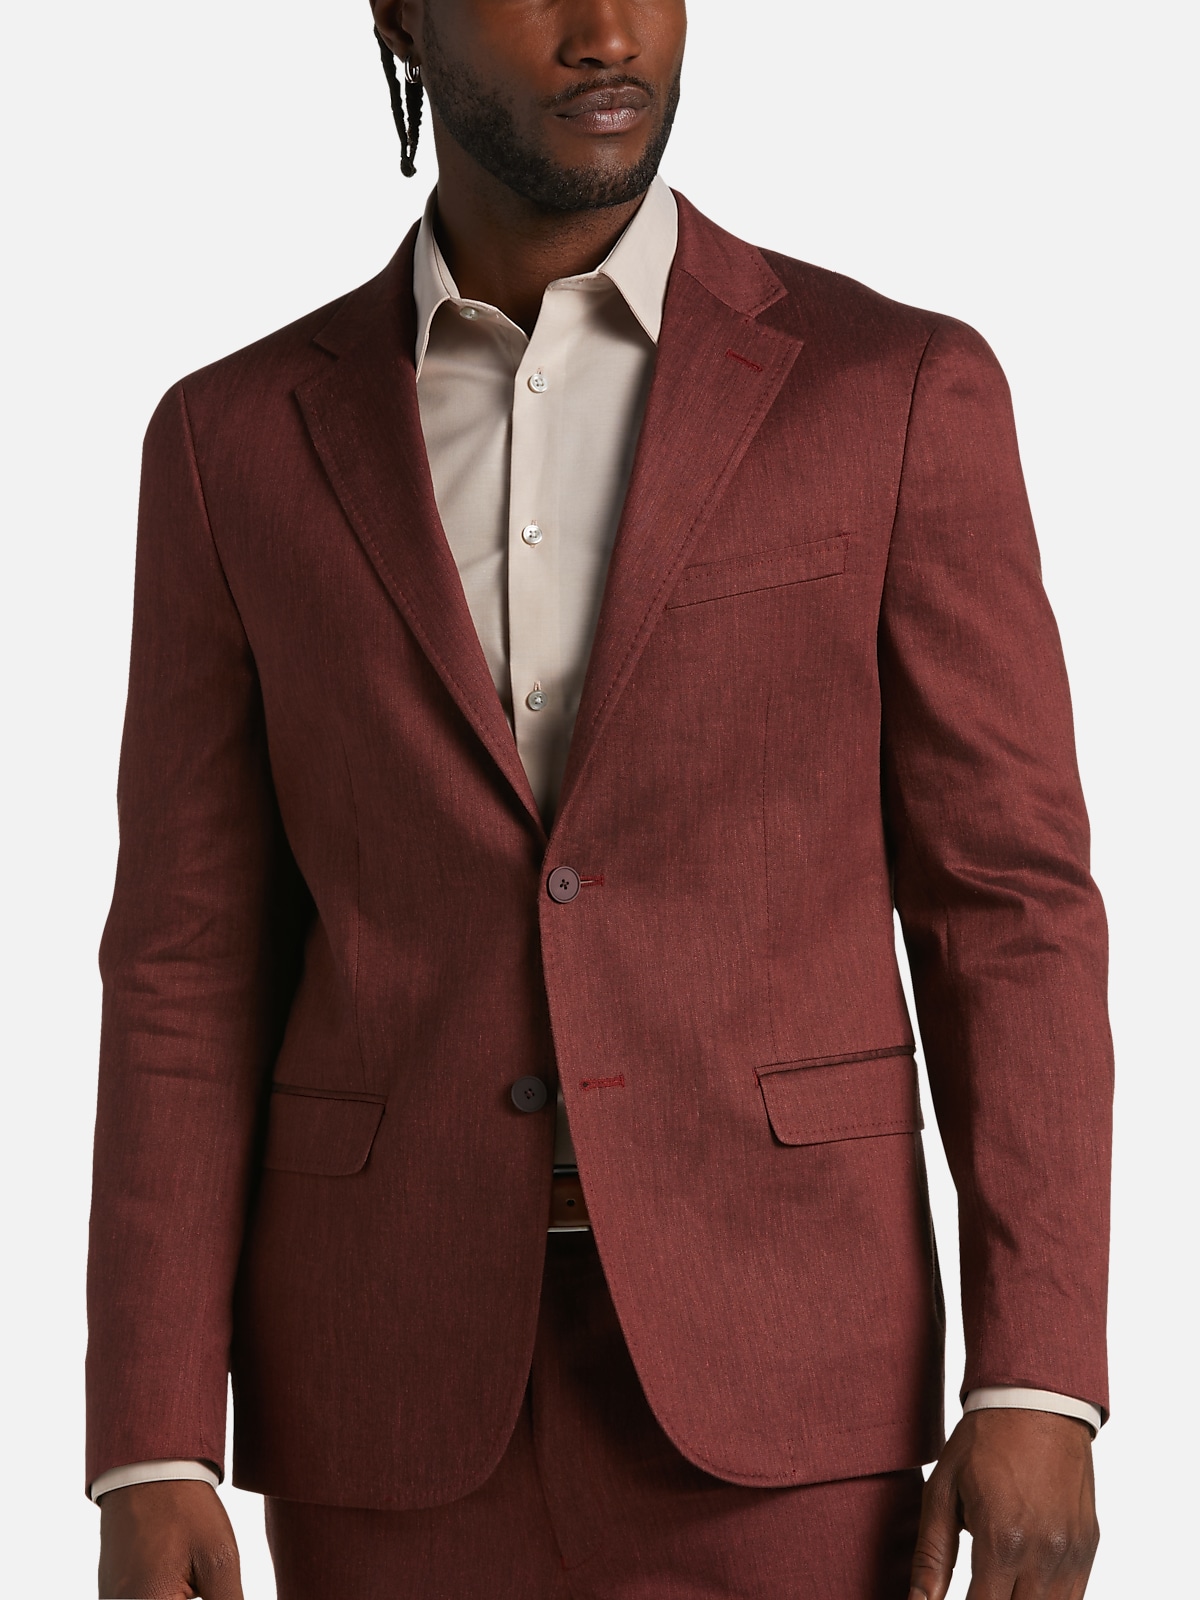 https://image.menswearhouse.com/is/image/TMW/TMW_3XE1_08_CALVIN_KLEIN_SUIT_SEPARATE_JACKETS_BRICK_TWILL_MAIN?imPolicy=pdp-zoom-mob